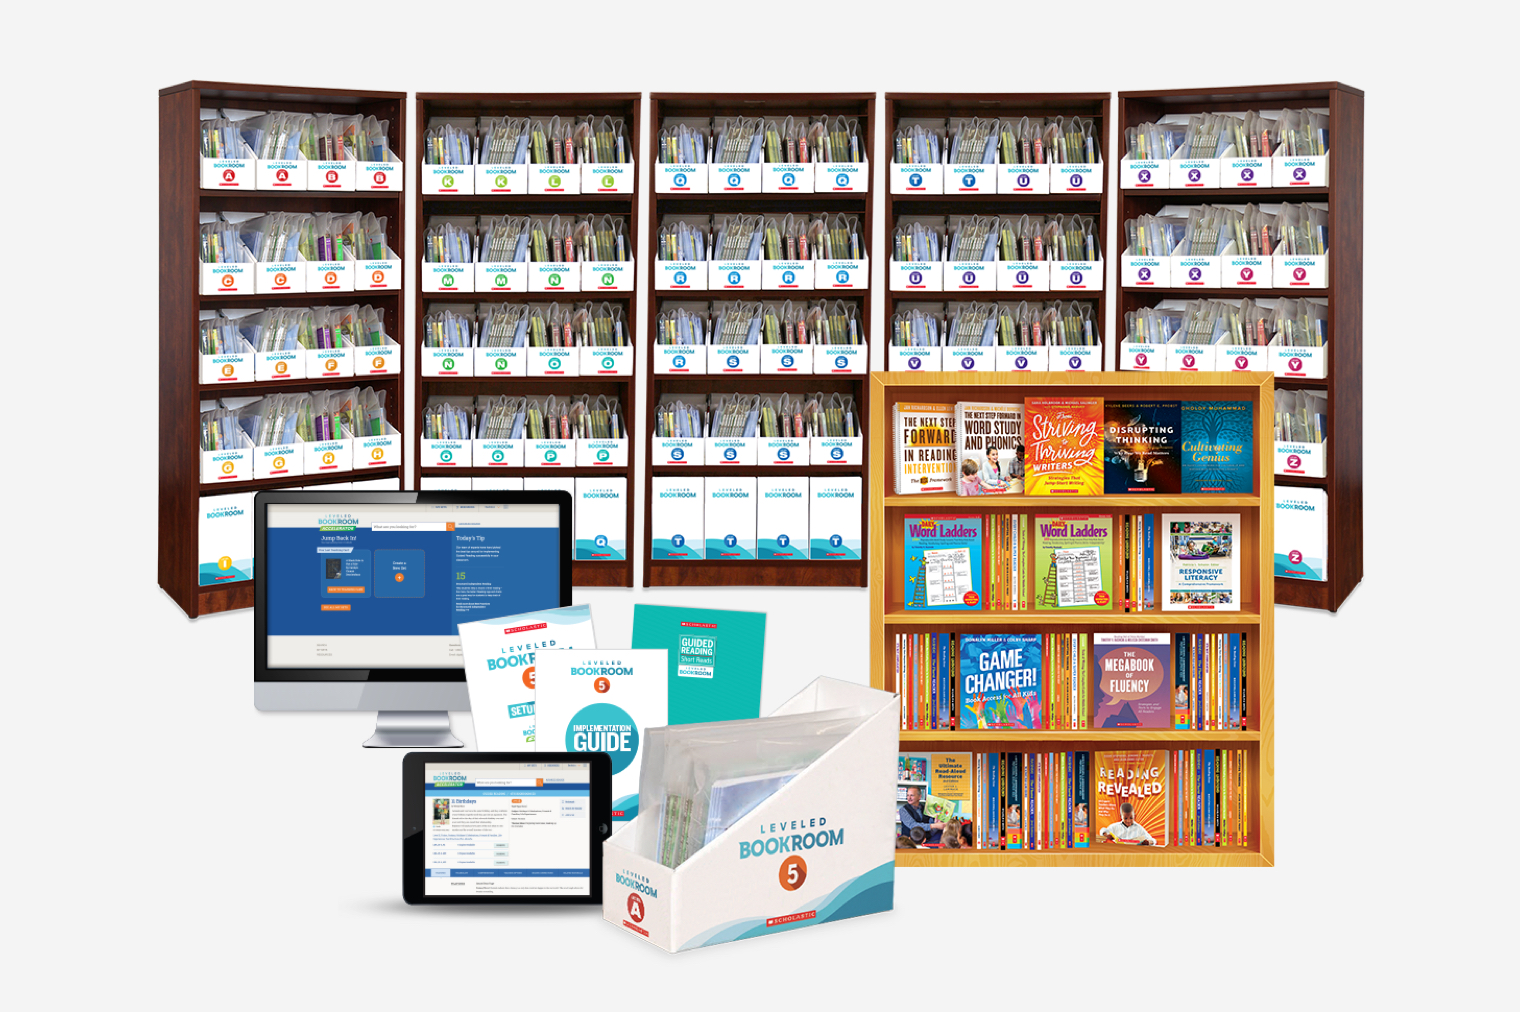 Leveled Bookrom Products